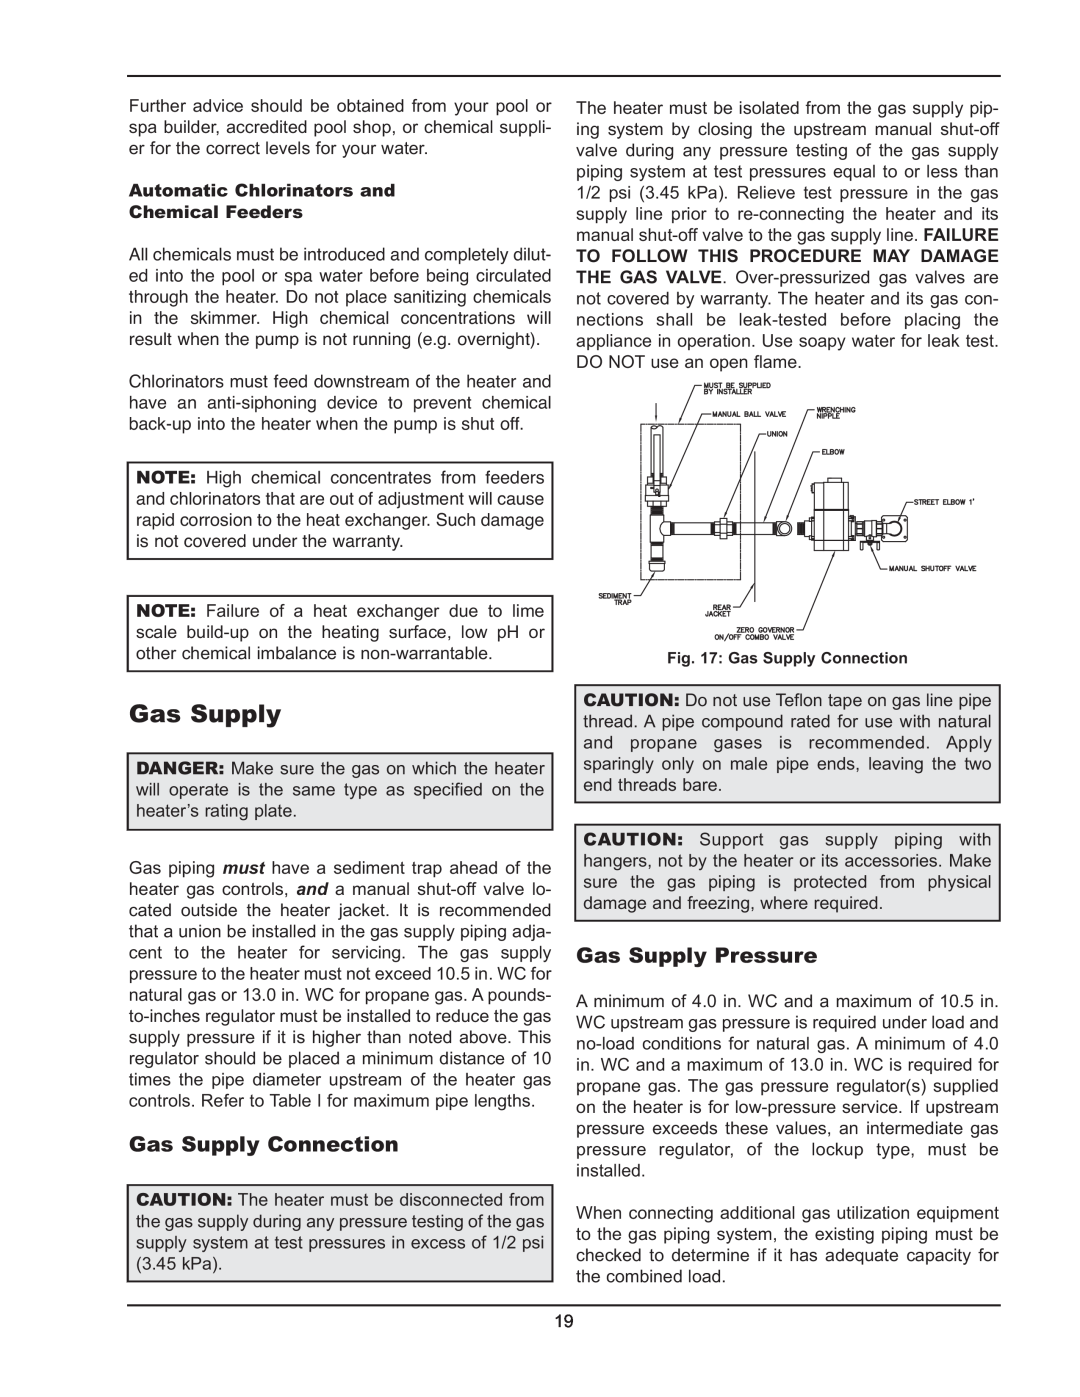 Raypak 503-2003 manual Gas Supply Connection, Gas Supply Pressure, Automatic Chlorinators and Chemical Feeders 